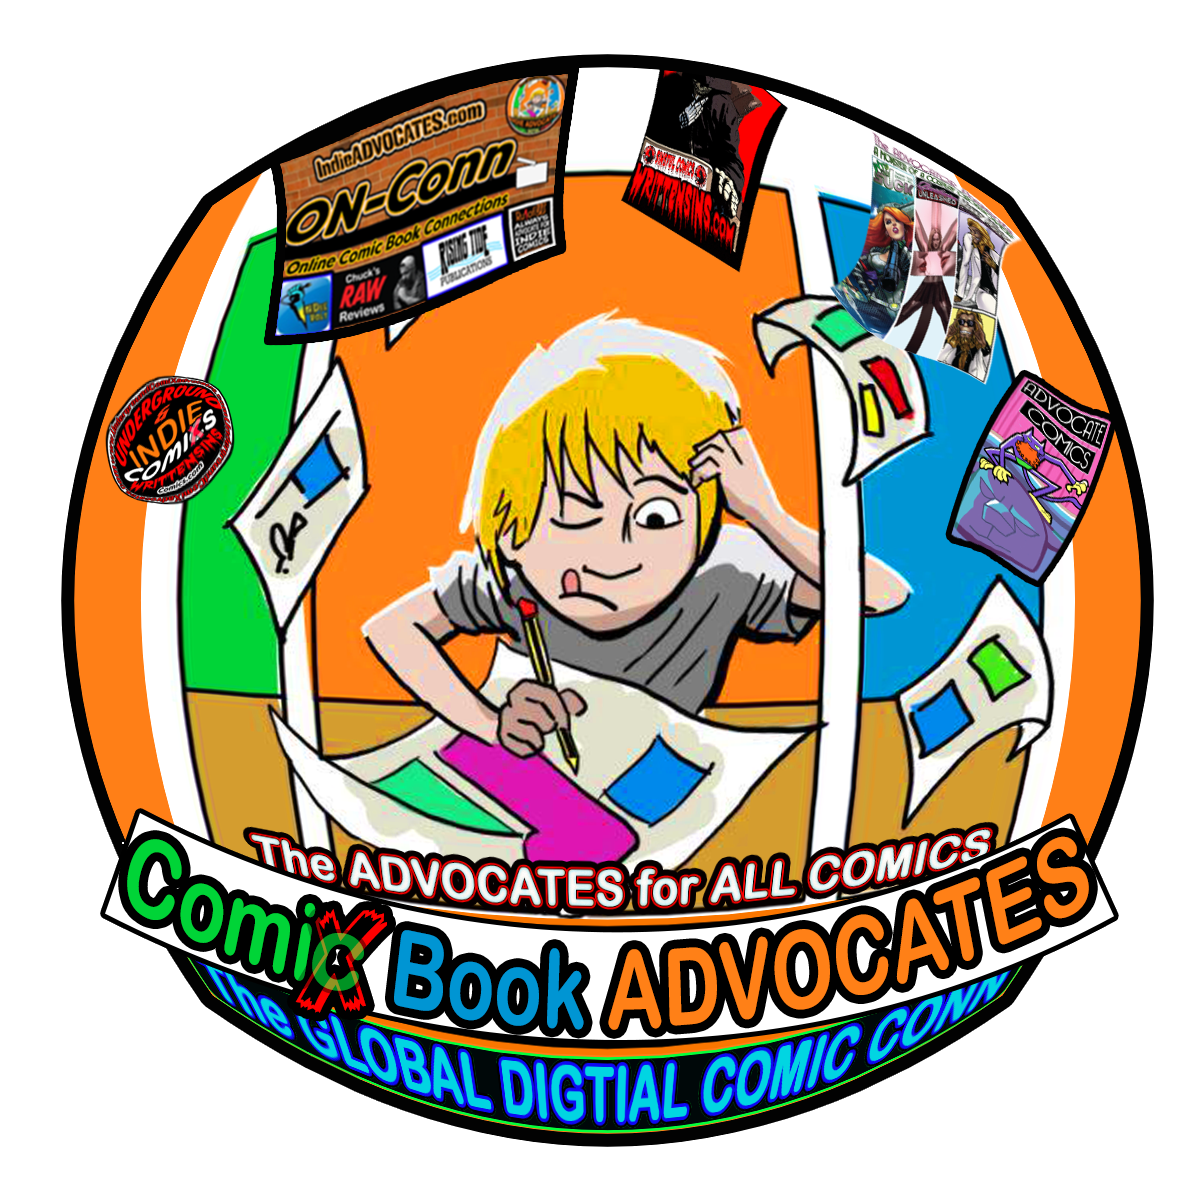 Welcome to Comic Book ADVOCATES where The LOVE OF COMICS comes 1st and WE EMPOWER THE FANS..